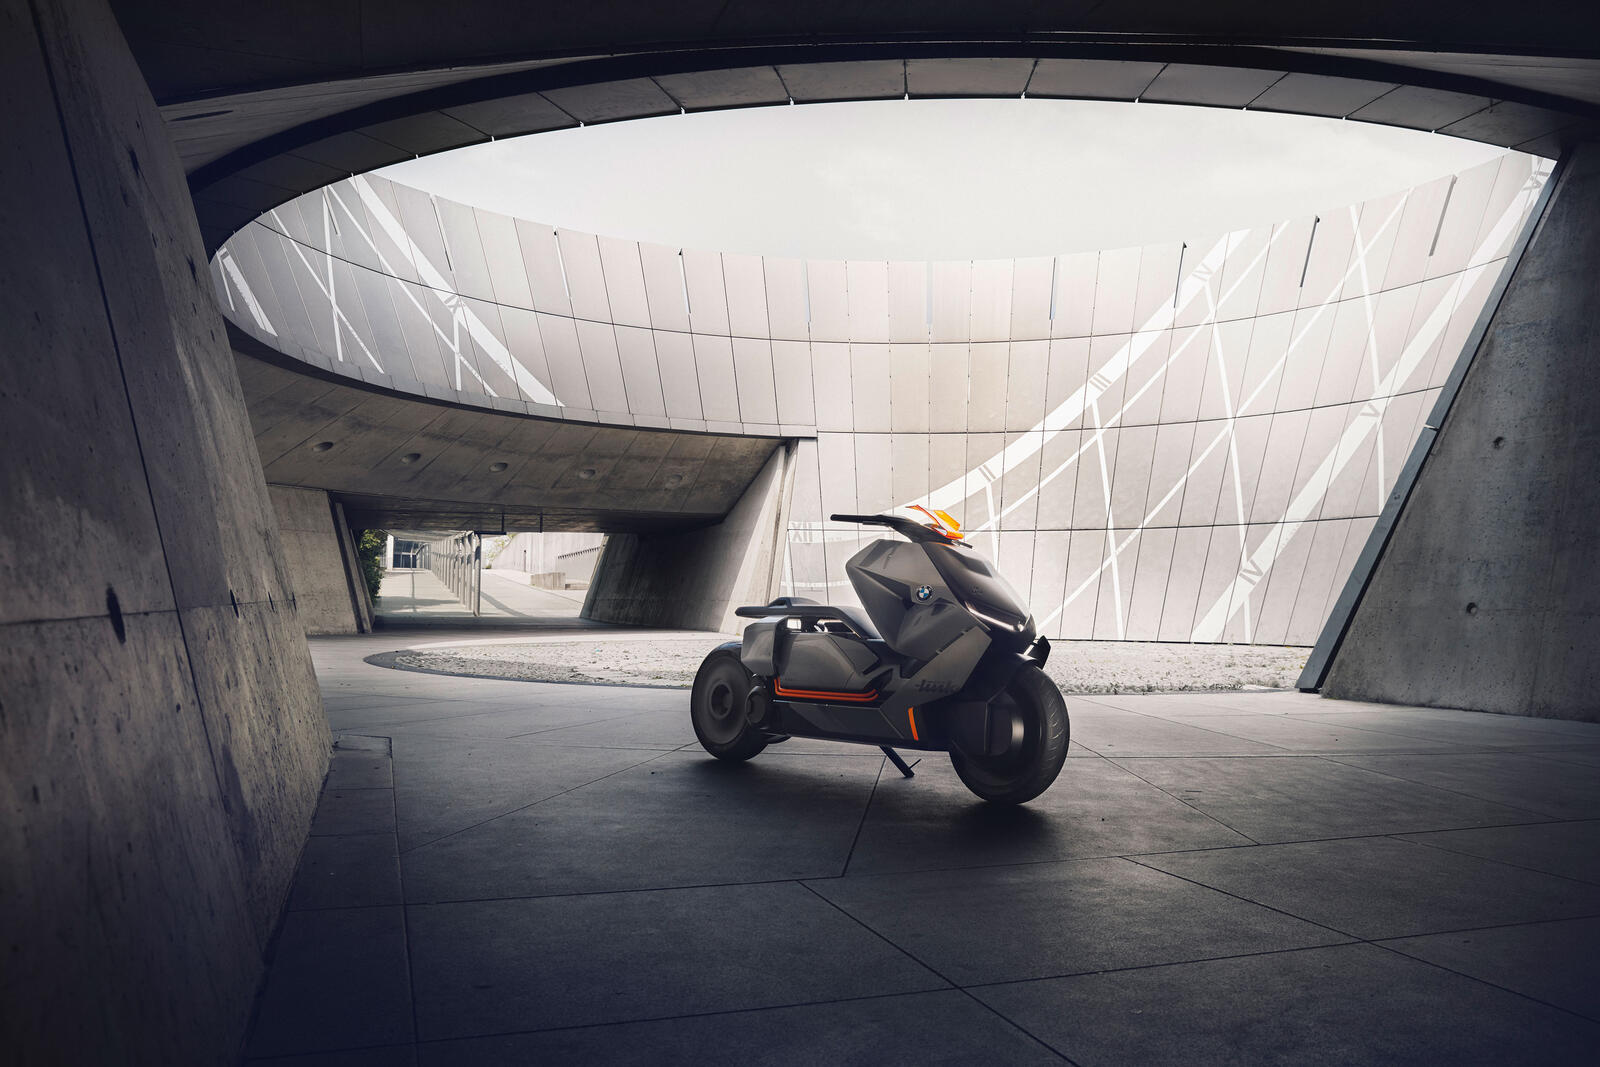 Wallpapers BMW motorcycles concept bikes on the desktop